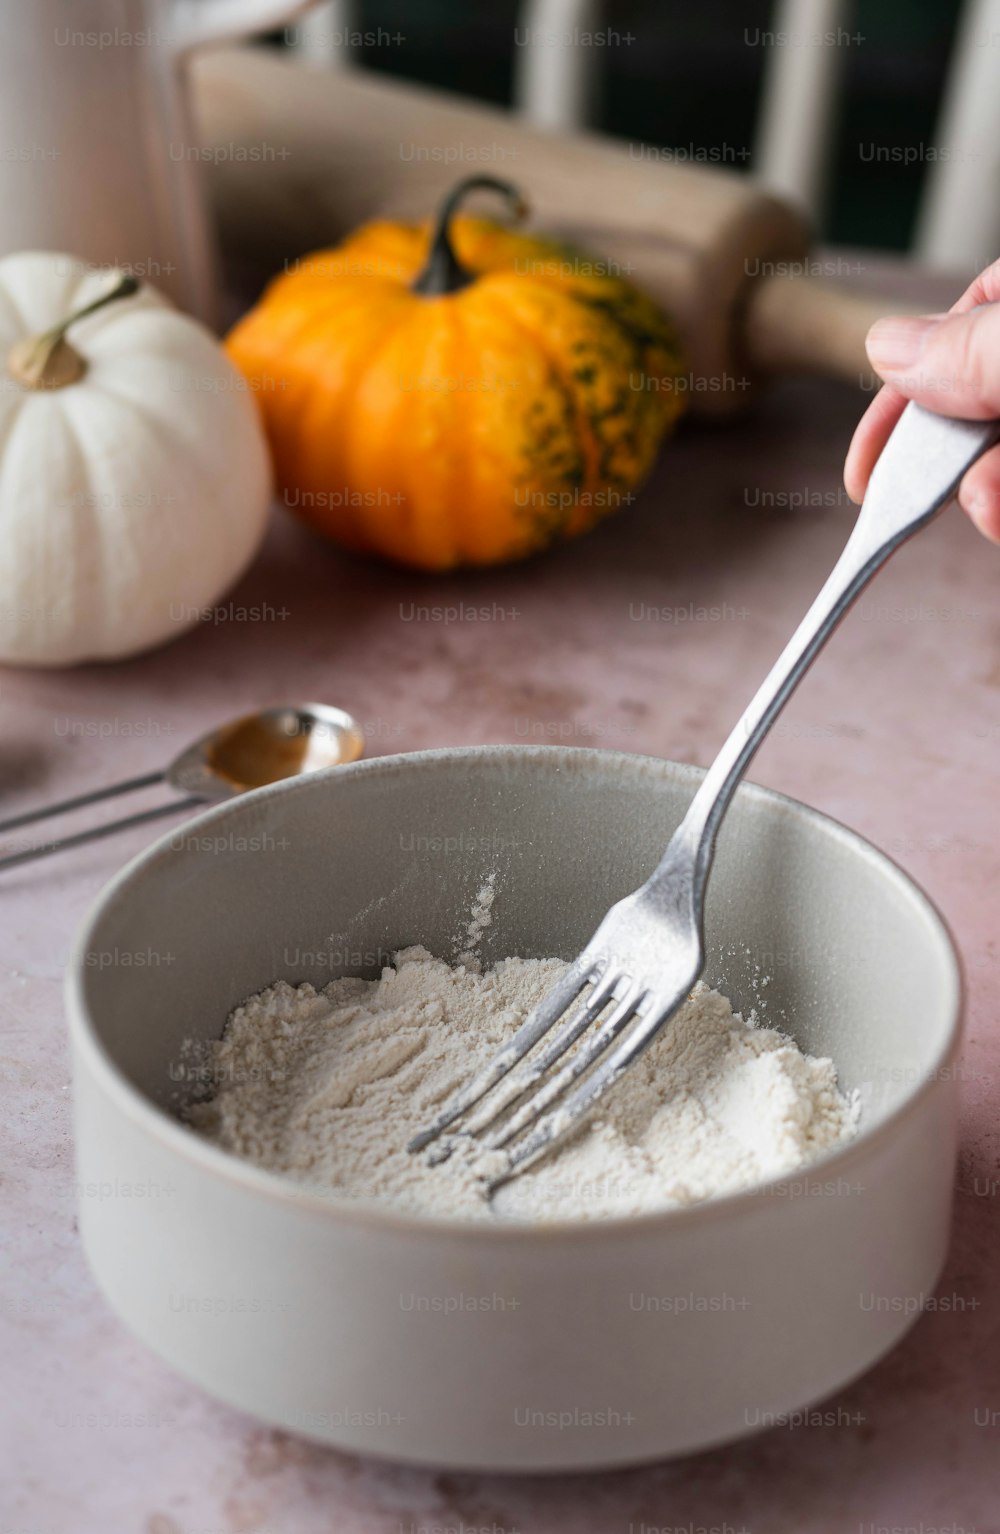 a person holding a fork in a bowl of flour